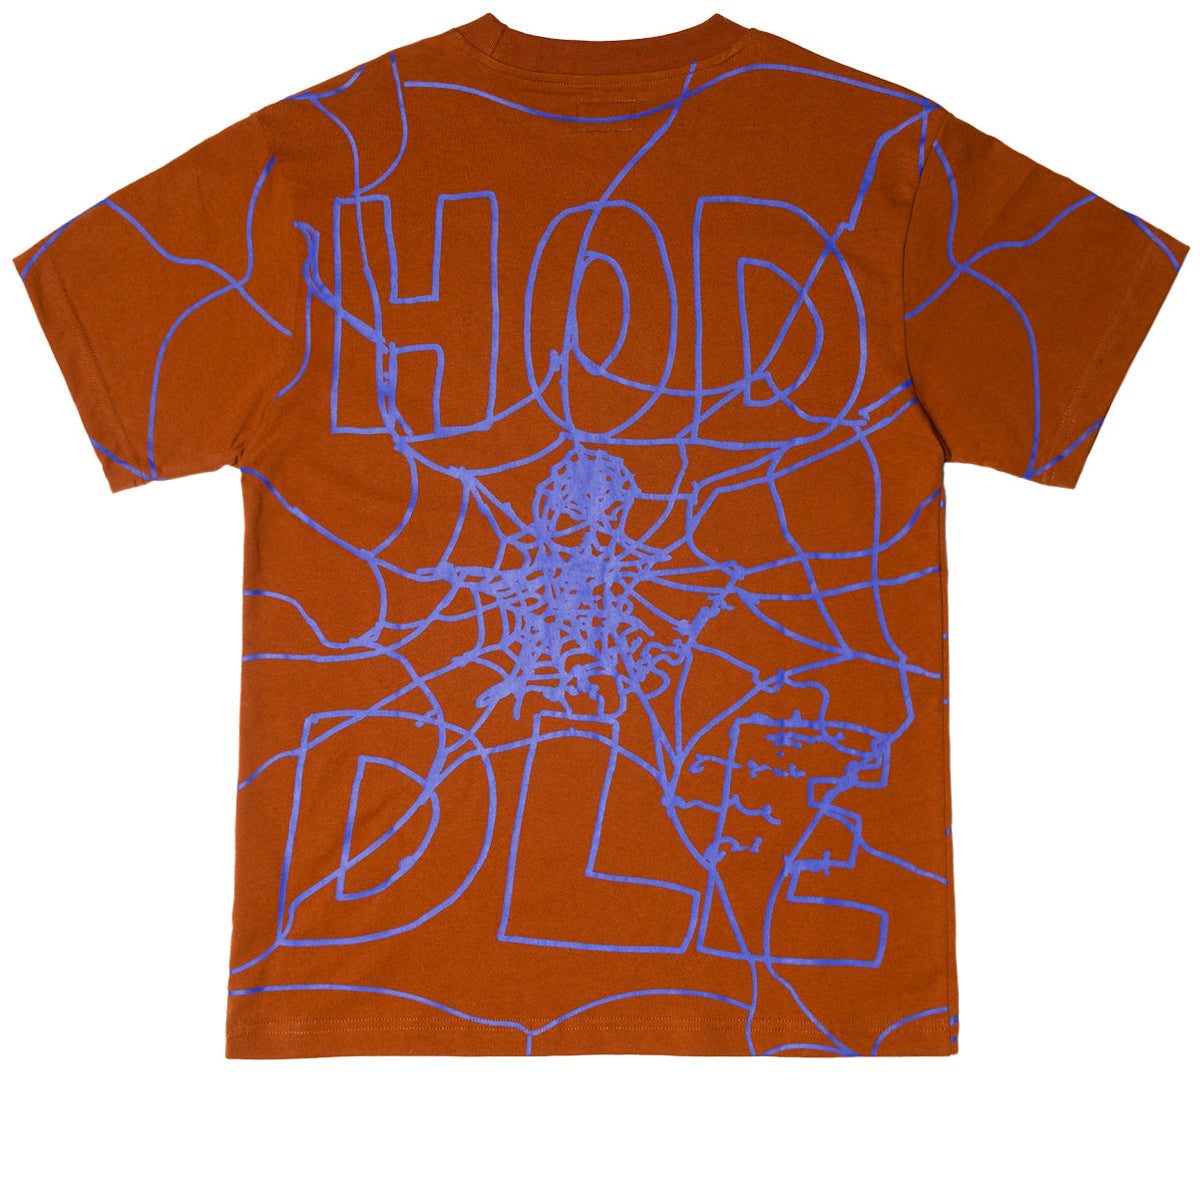 Hoddle Web All Over Print T-Shirt - Brown image 2